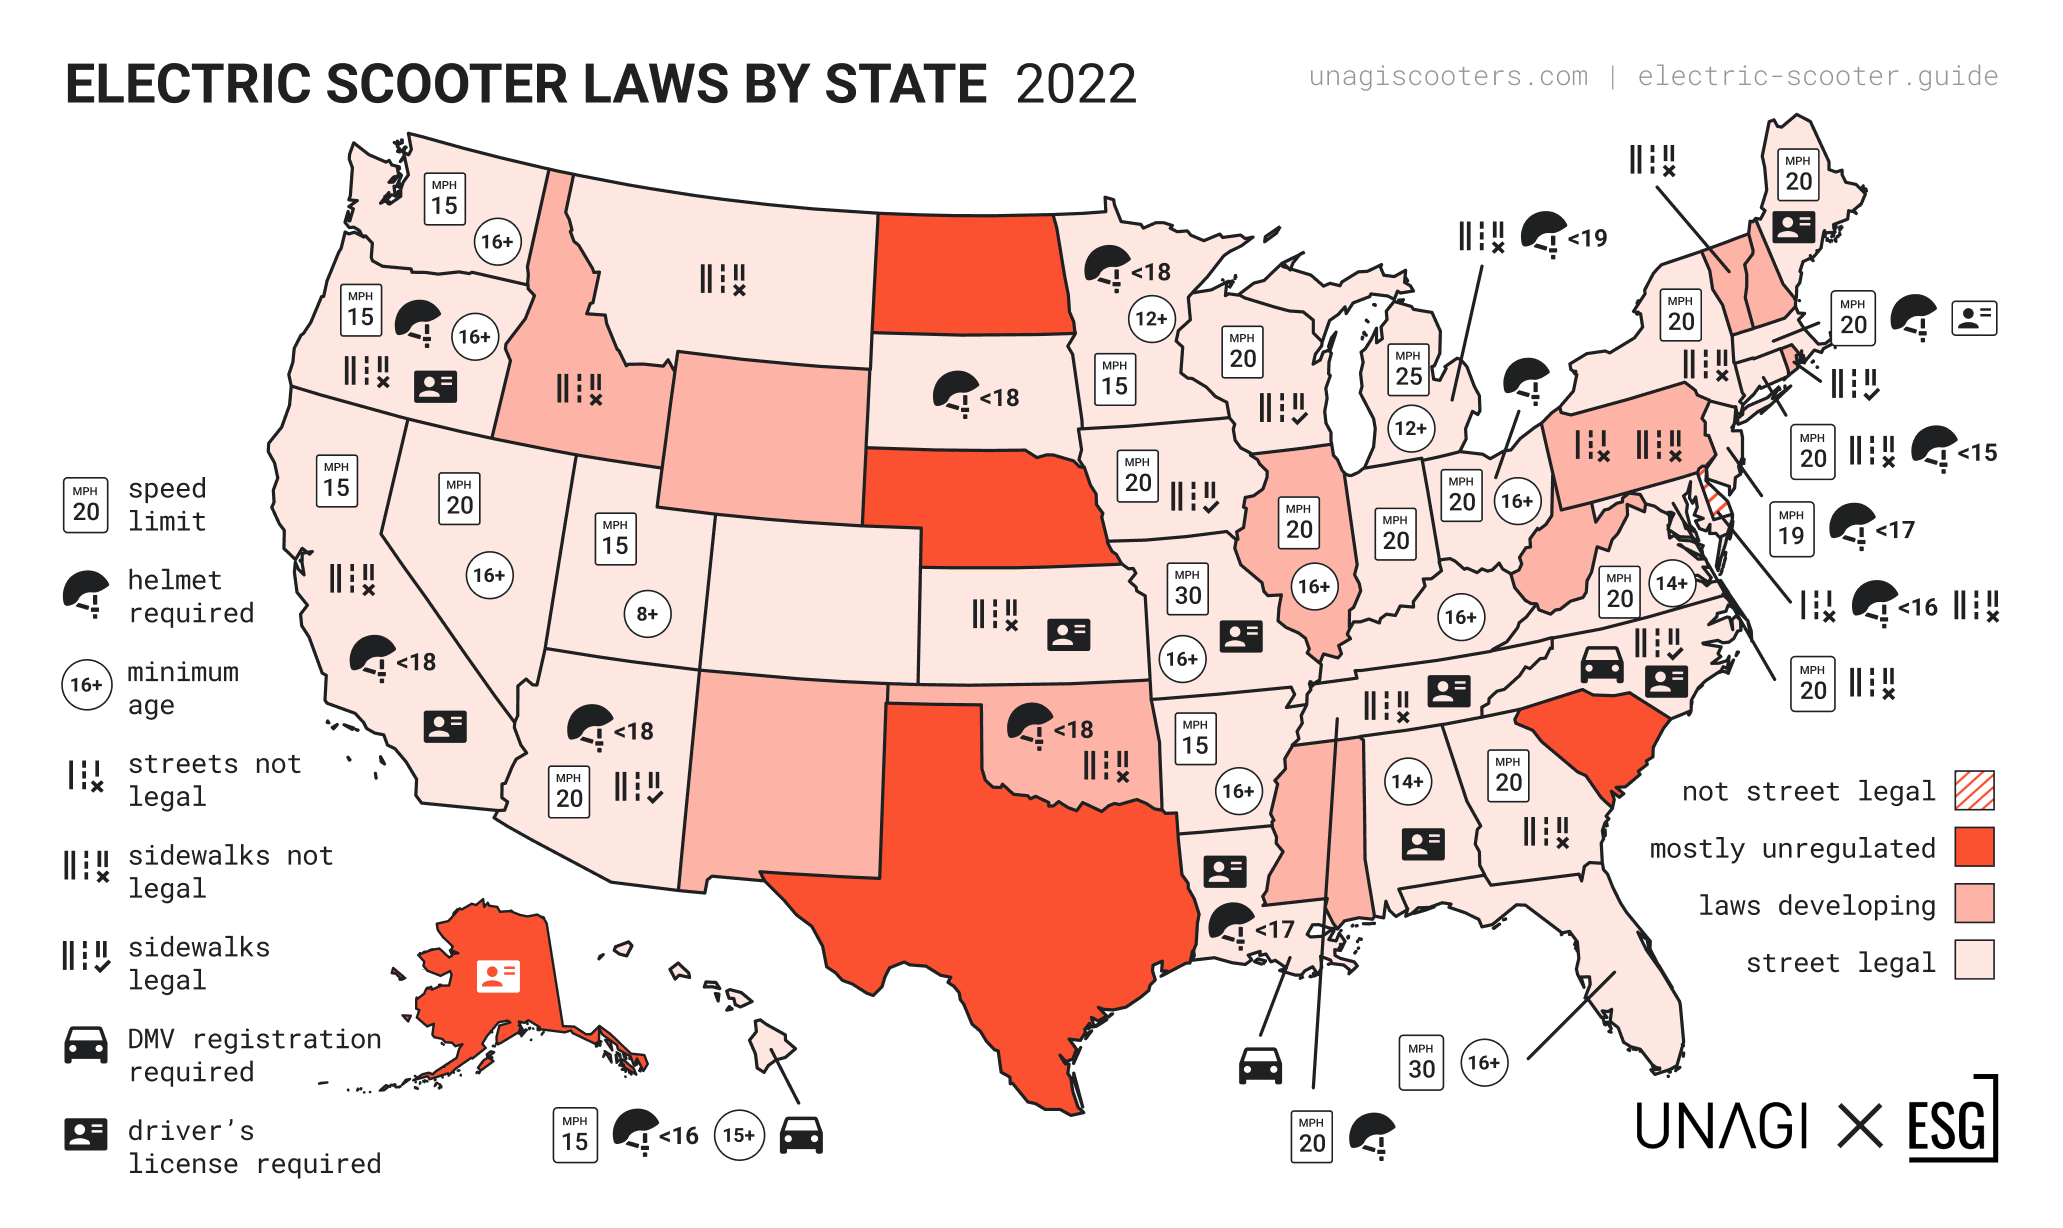 electric scooter laws by state in the US